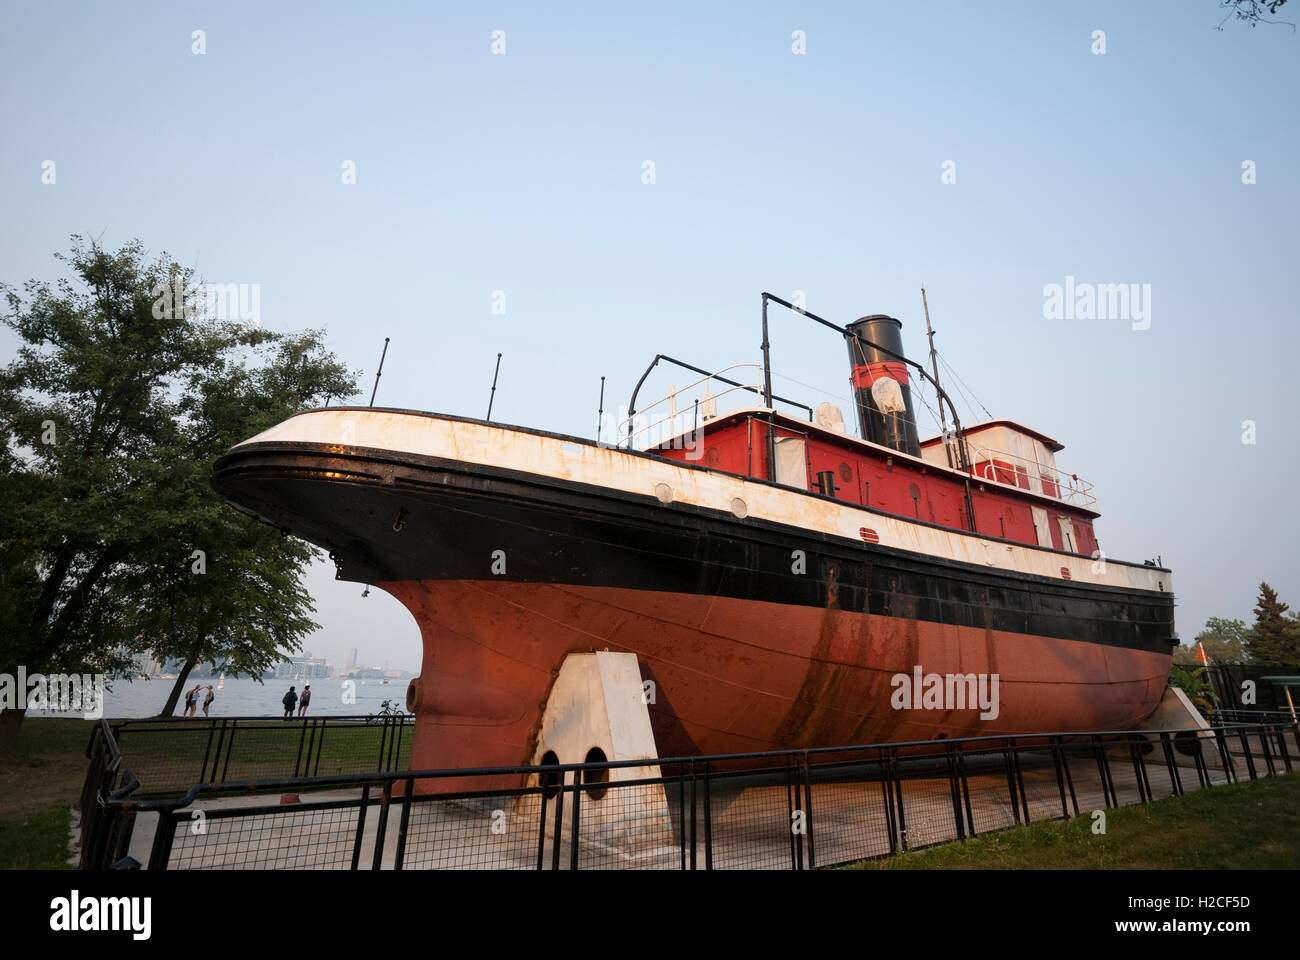 The historic tugboat named after champion rower Ned Hanlan on display at the ferry dock of Hanlans Point, Toronto Island Canada Stock Photo